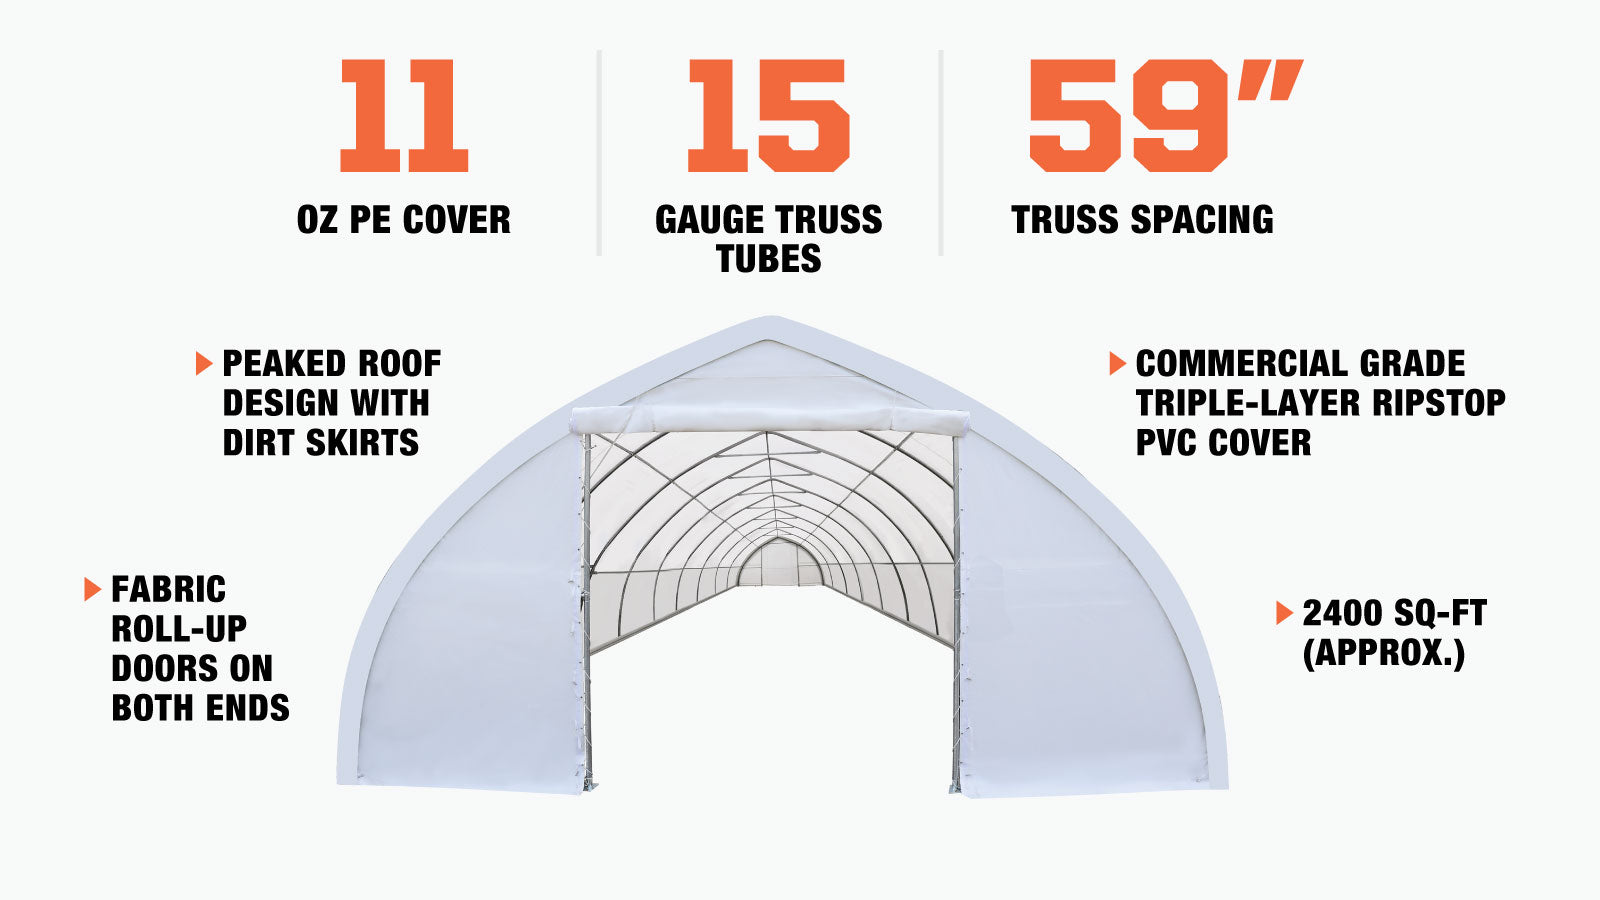 TMG Industrial 30' x 80' Peak Ceiling Storage Shelter with Heavy Duty 11 oz PE Cover & Drive Through Doors, TMG-ST3080E (Previously ST3080)-description-image